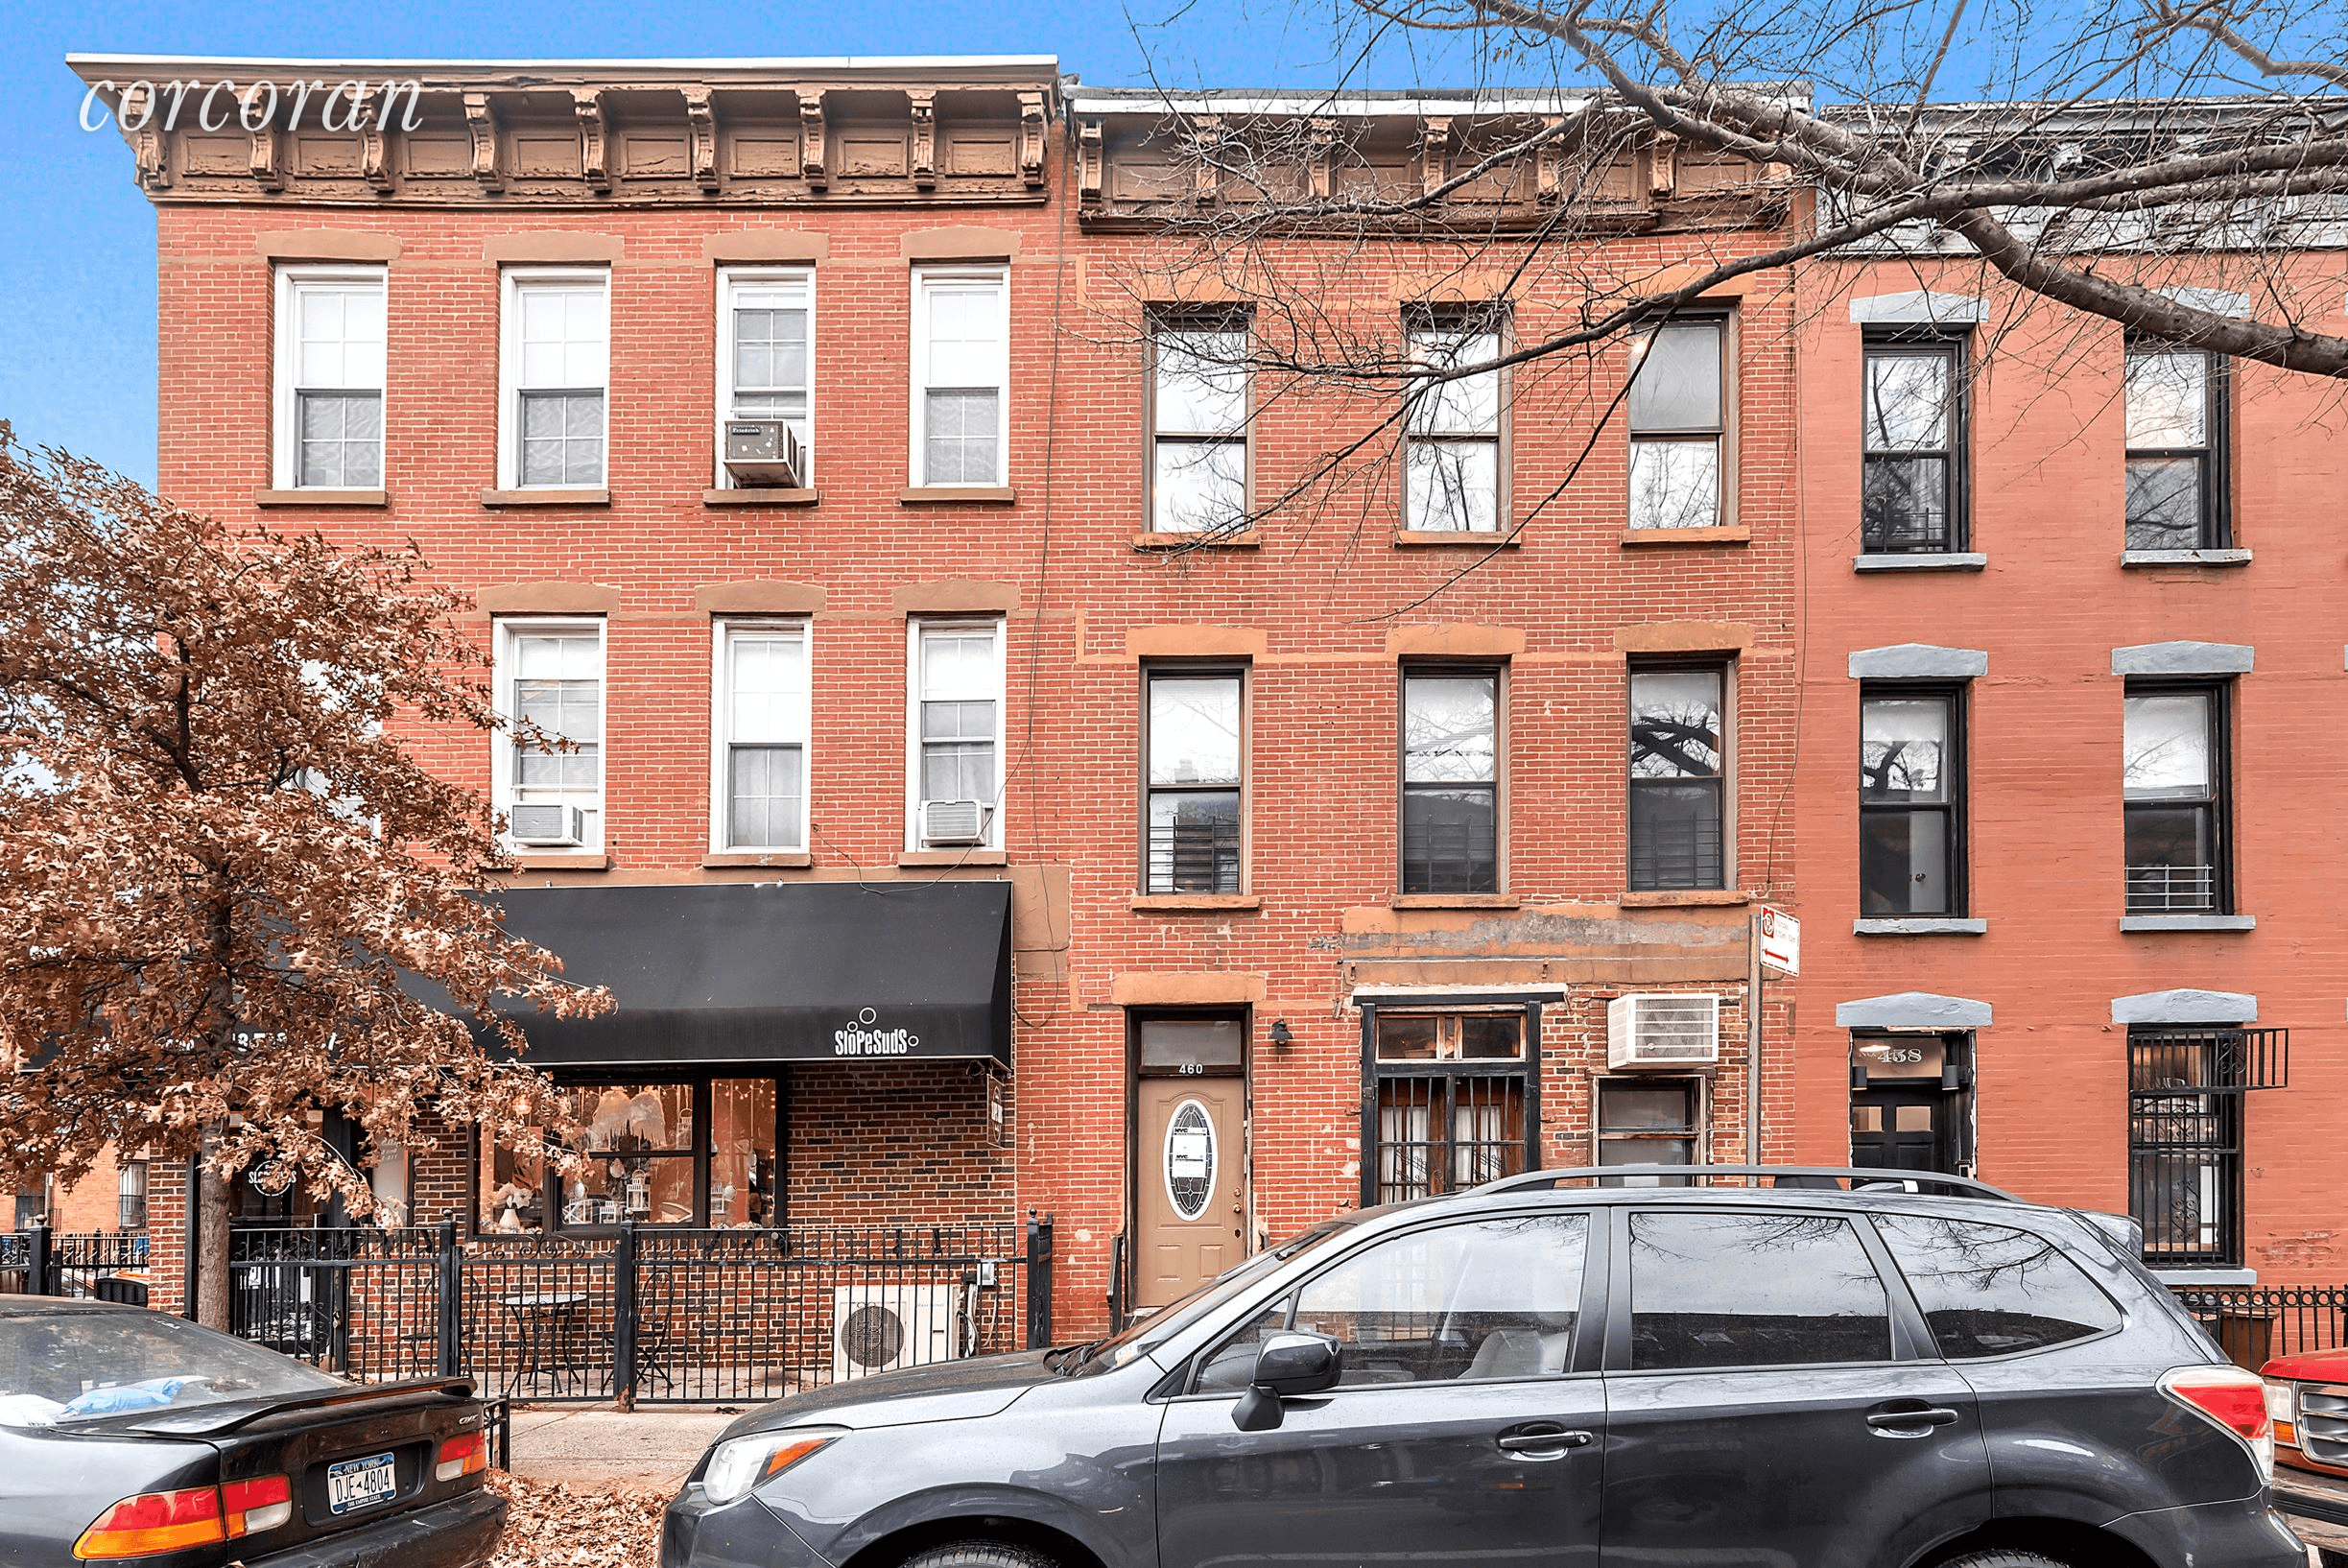 460 7th Avenue is a classic brick, 3 family row house measuring 19 wide x 45 deep on a 65 foot lot.